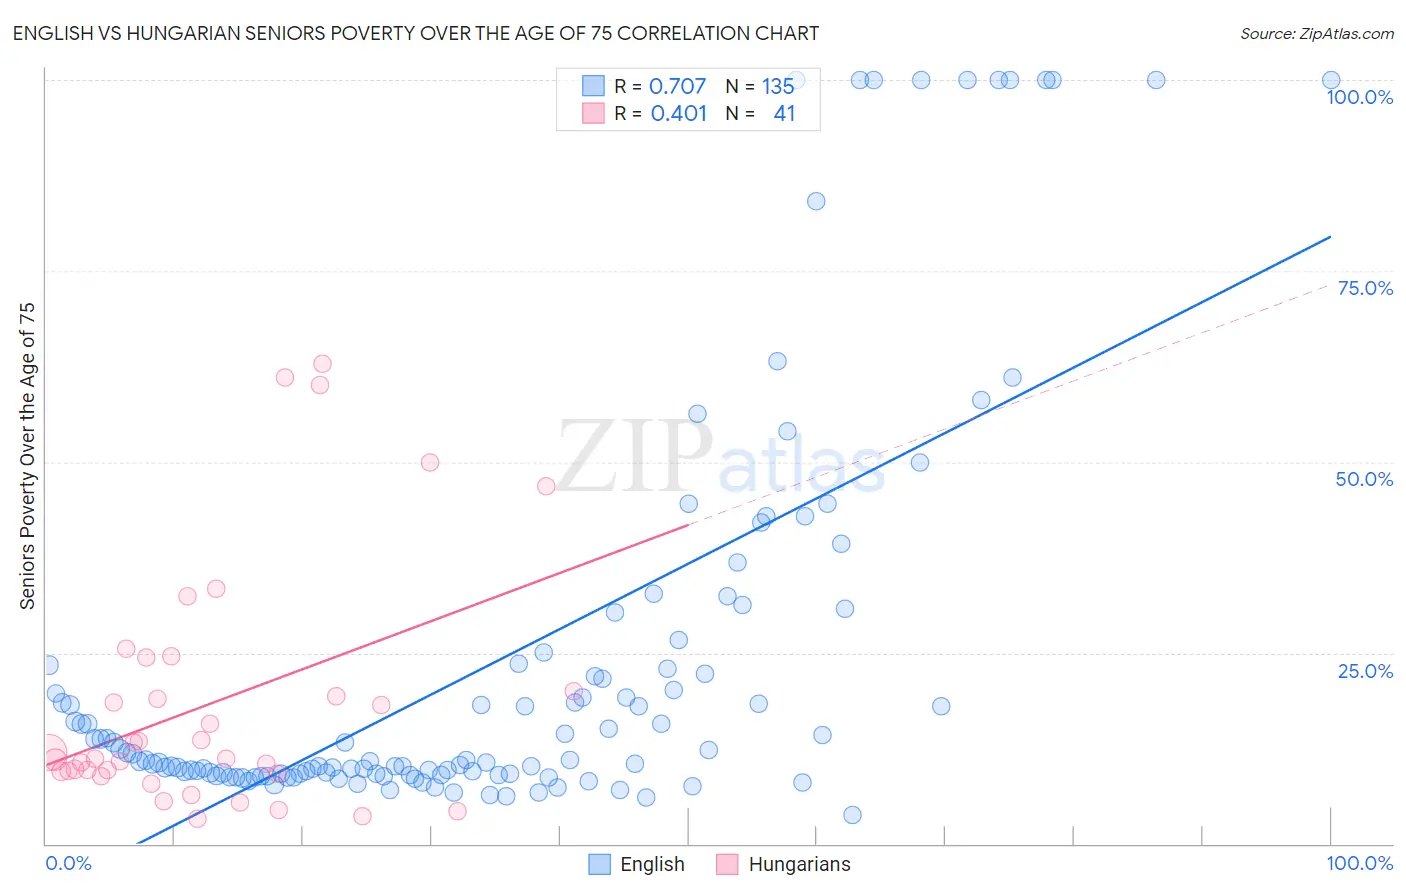 English vs Hungarian Seniors Poverty Over the Age of 75